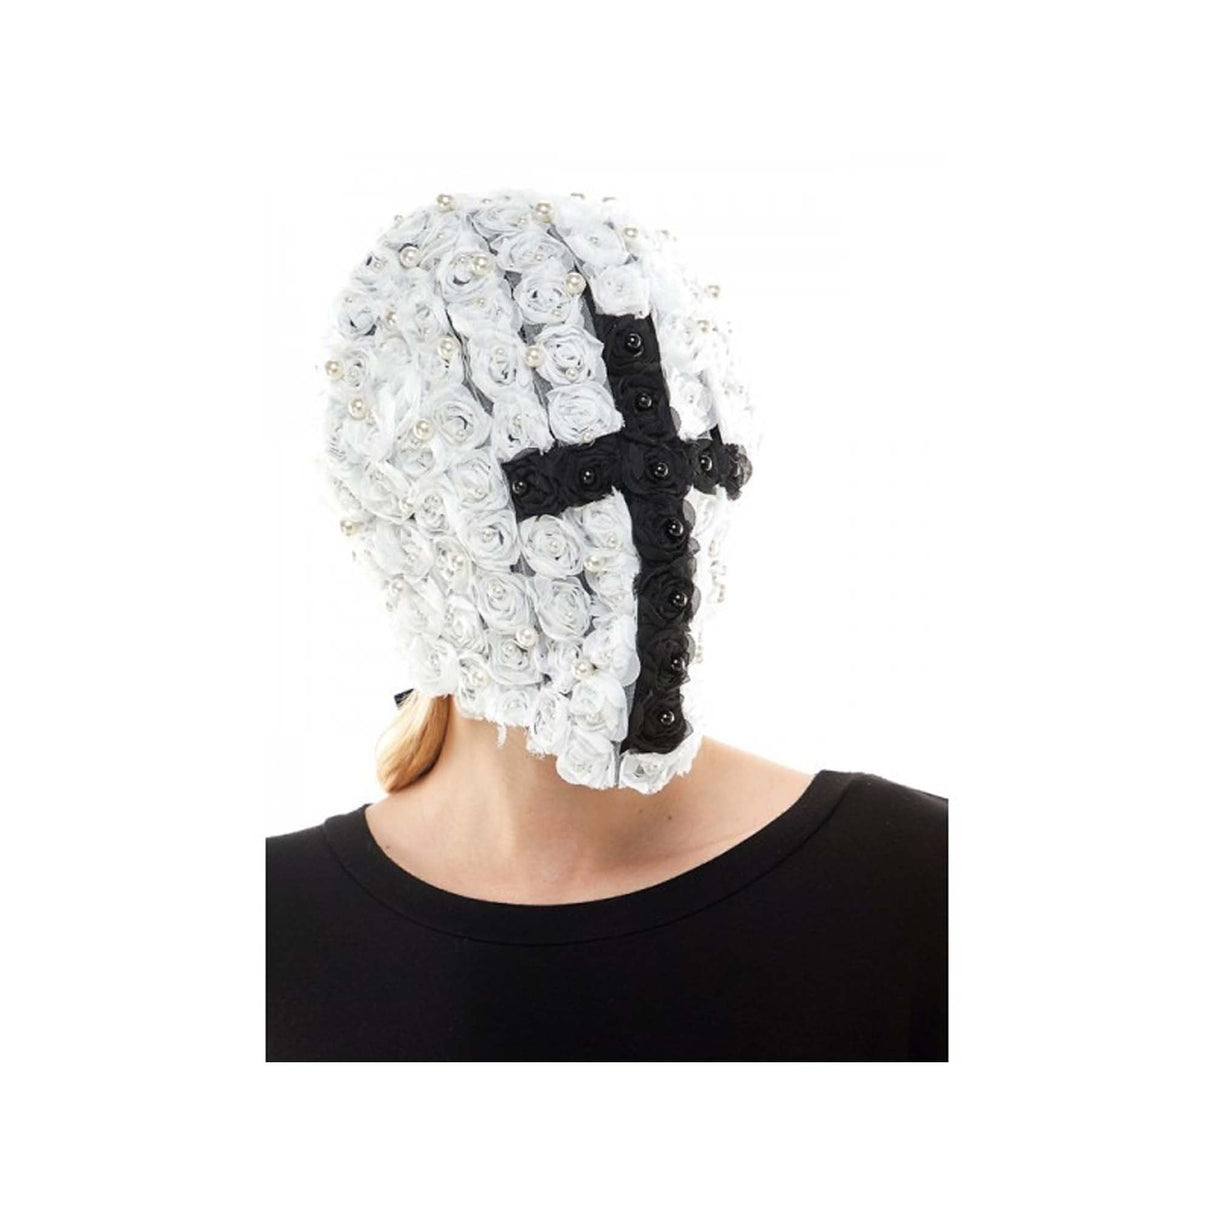 KBW GLOBAL CORP Costume Accessories Full Face Mask With Black Cross for Adults, 1 Count 831687040429